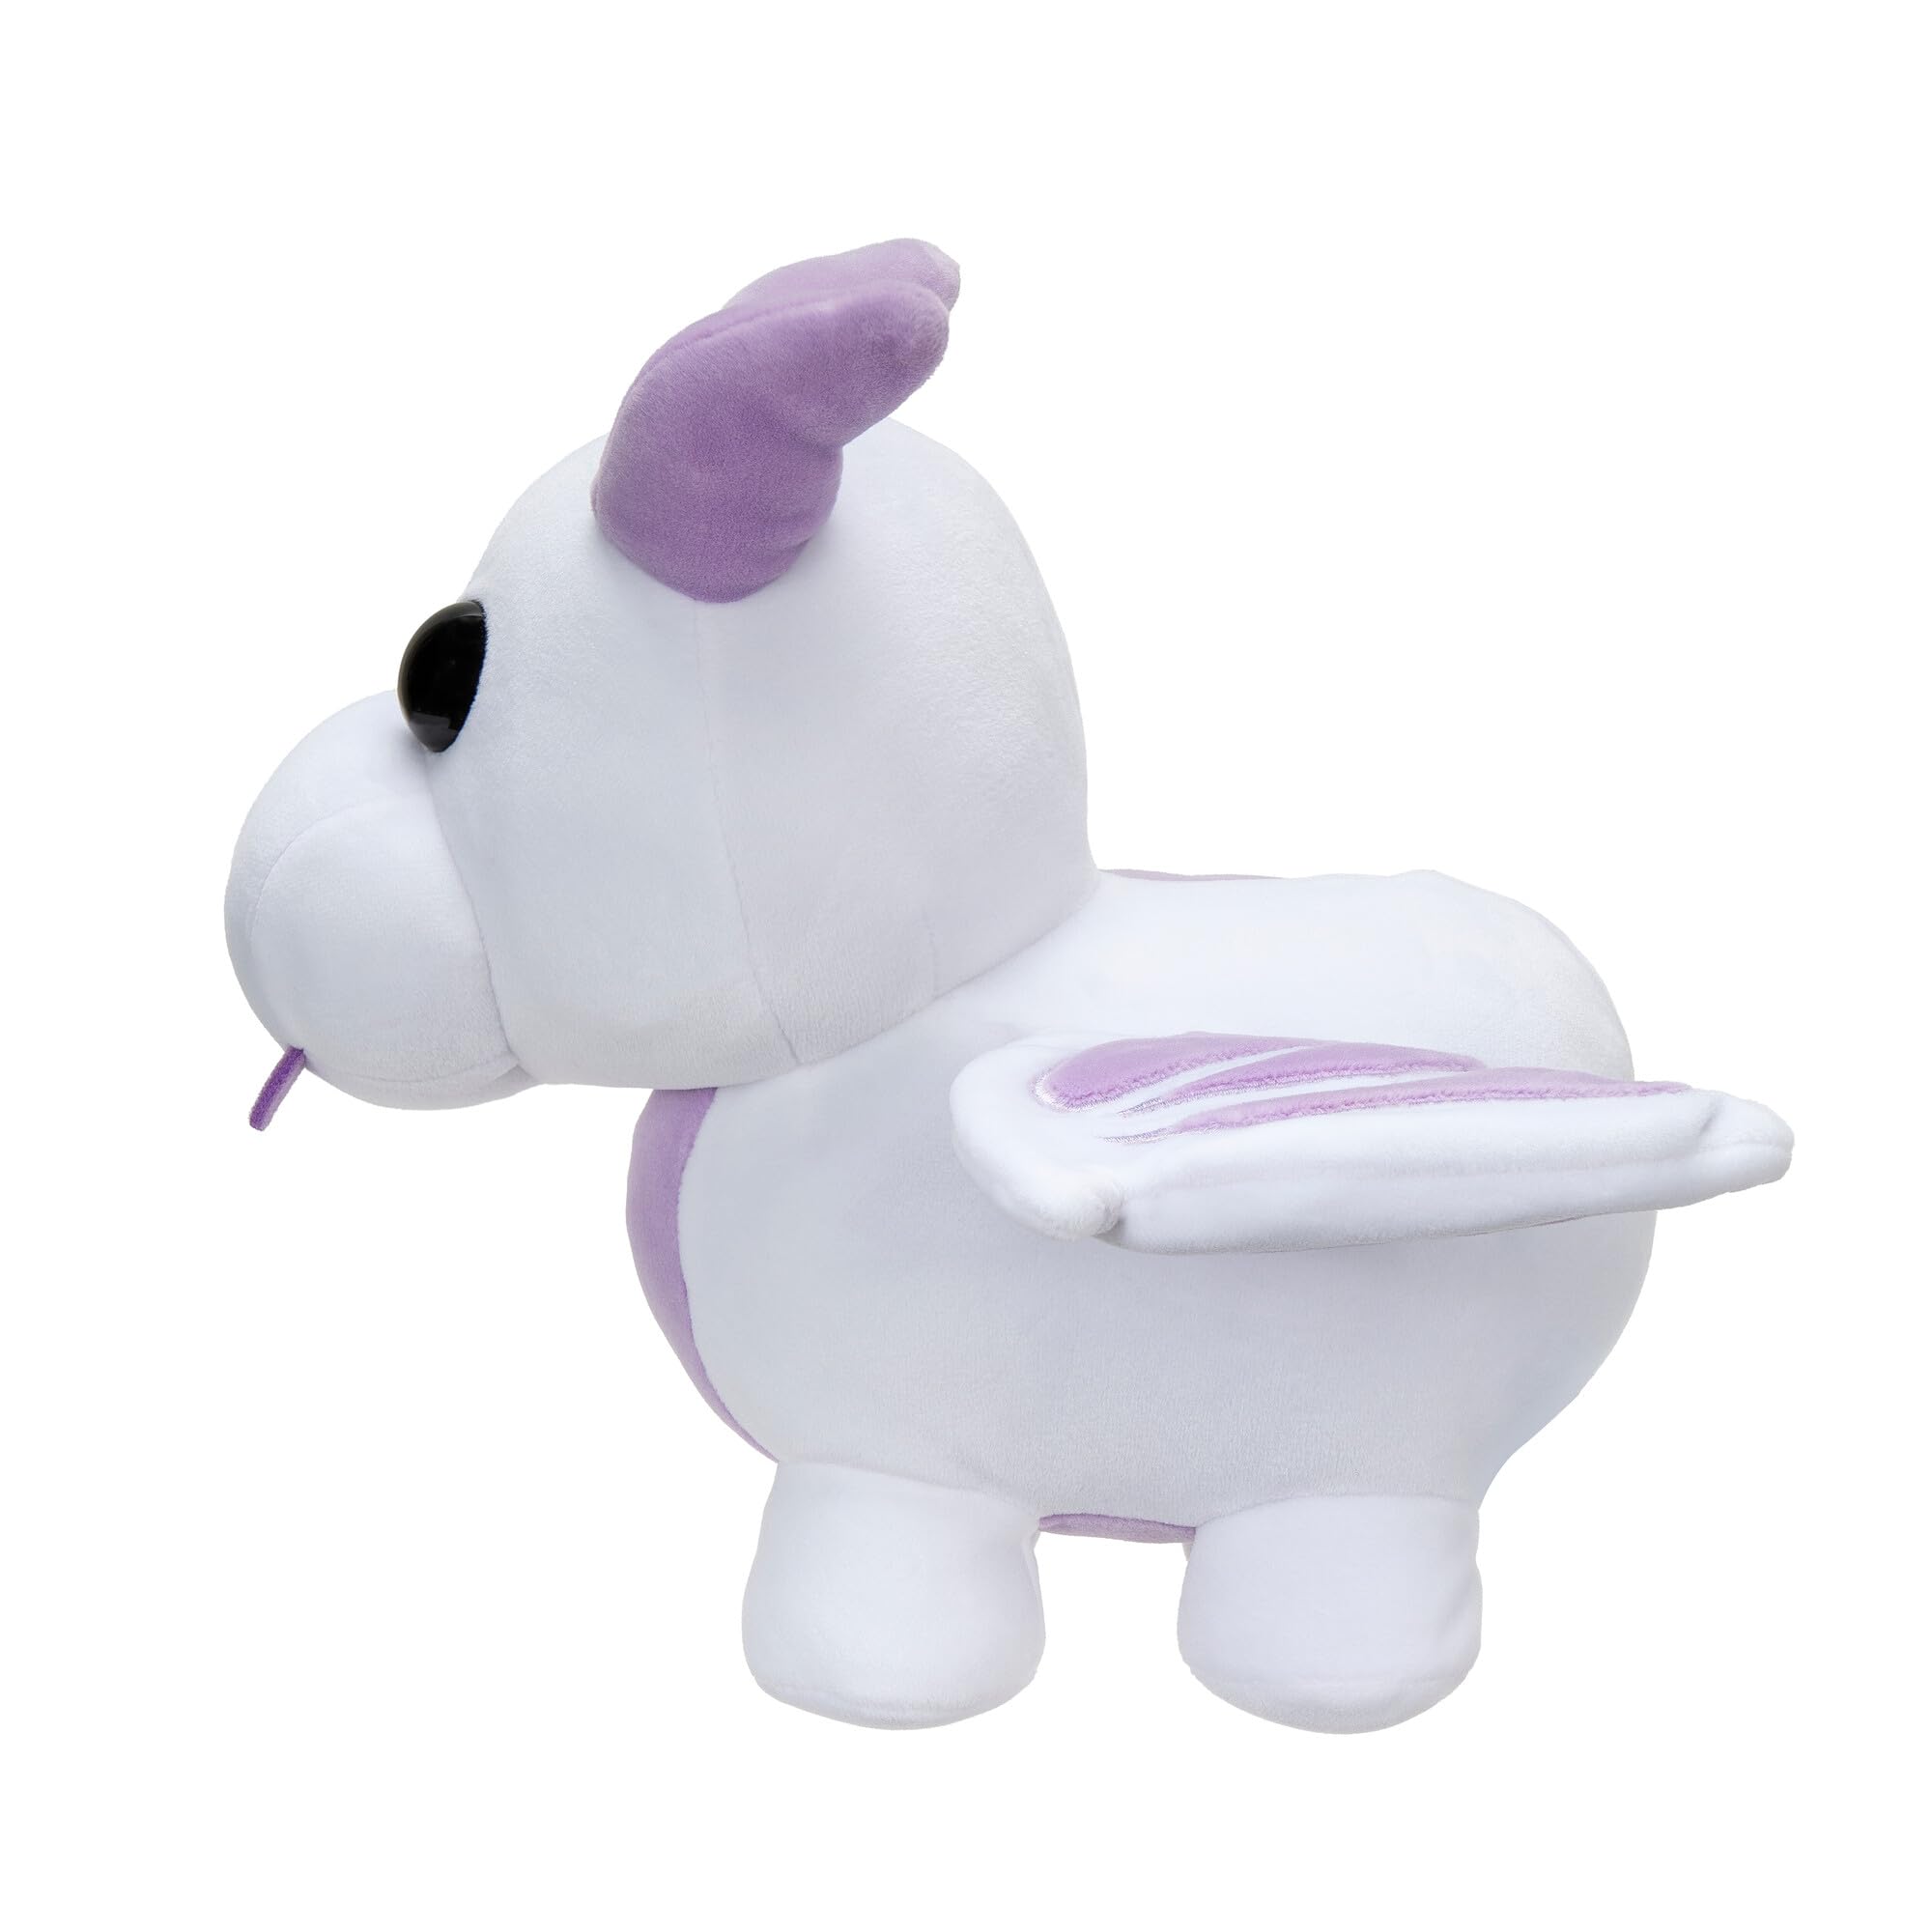 Adopt Me! Collector Plush - Lavender Dragon - Series 3 - Legendary in-Game Stylization Plush - Toys for Kids Featuring Your Favorite Pet, Ages 6+